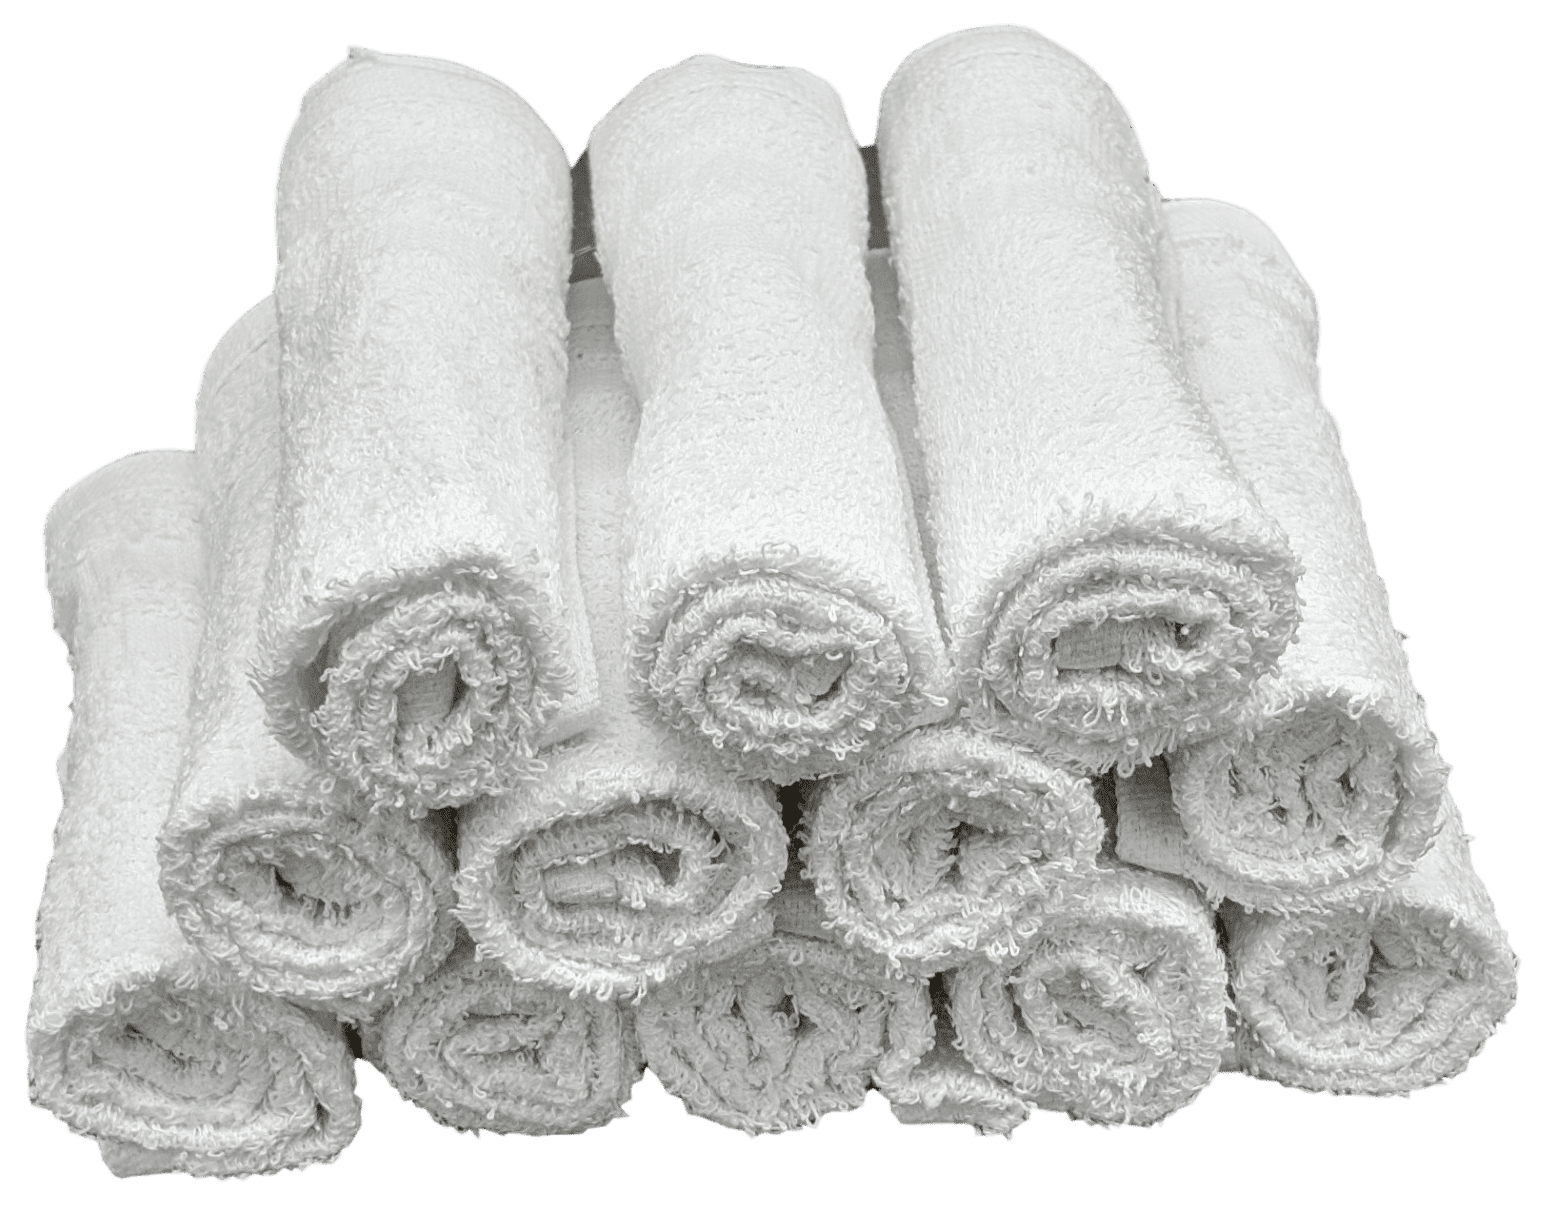 Economy Towels (White) Washcloths Set - 11x11 100% Cotton Terry Cloth Highly Absorbent Wash Rags for General Cleaning Bath Kitchen Salon Gym Mot